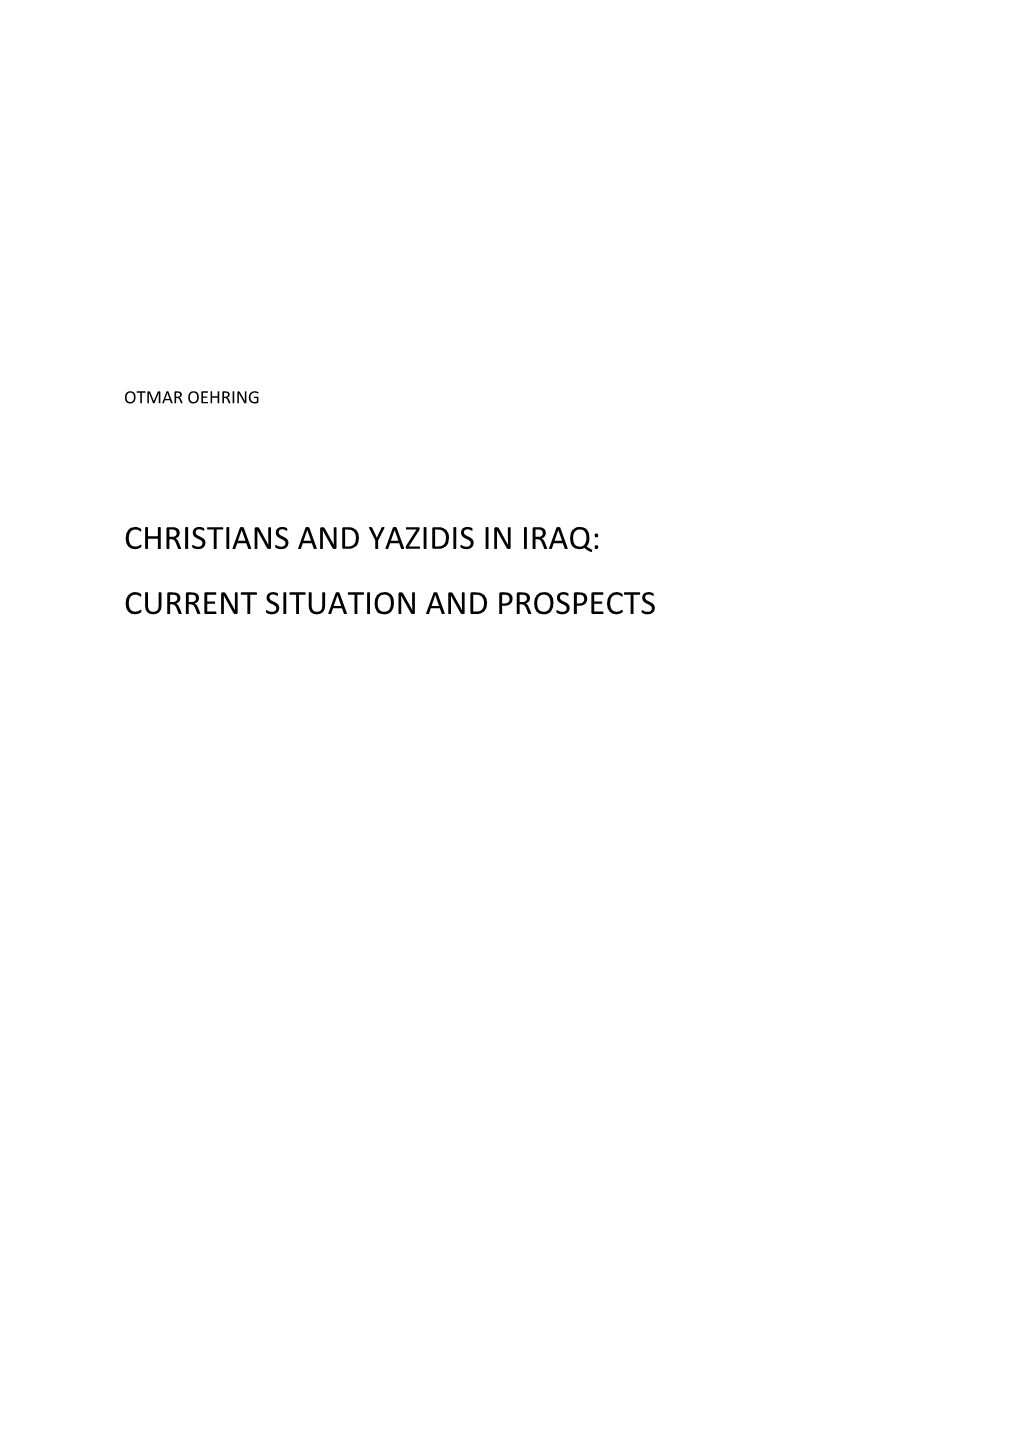 Christians and Yazidis in Iraq: Current Situation and Prospects